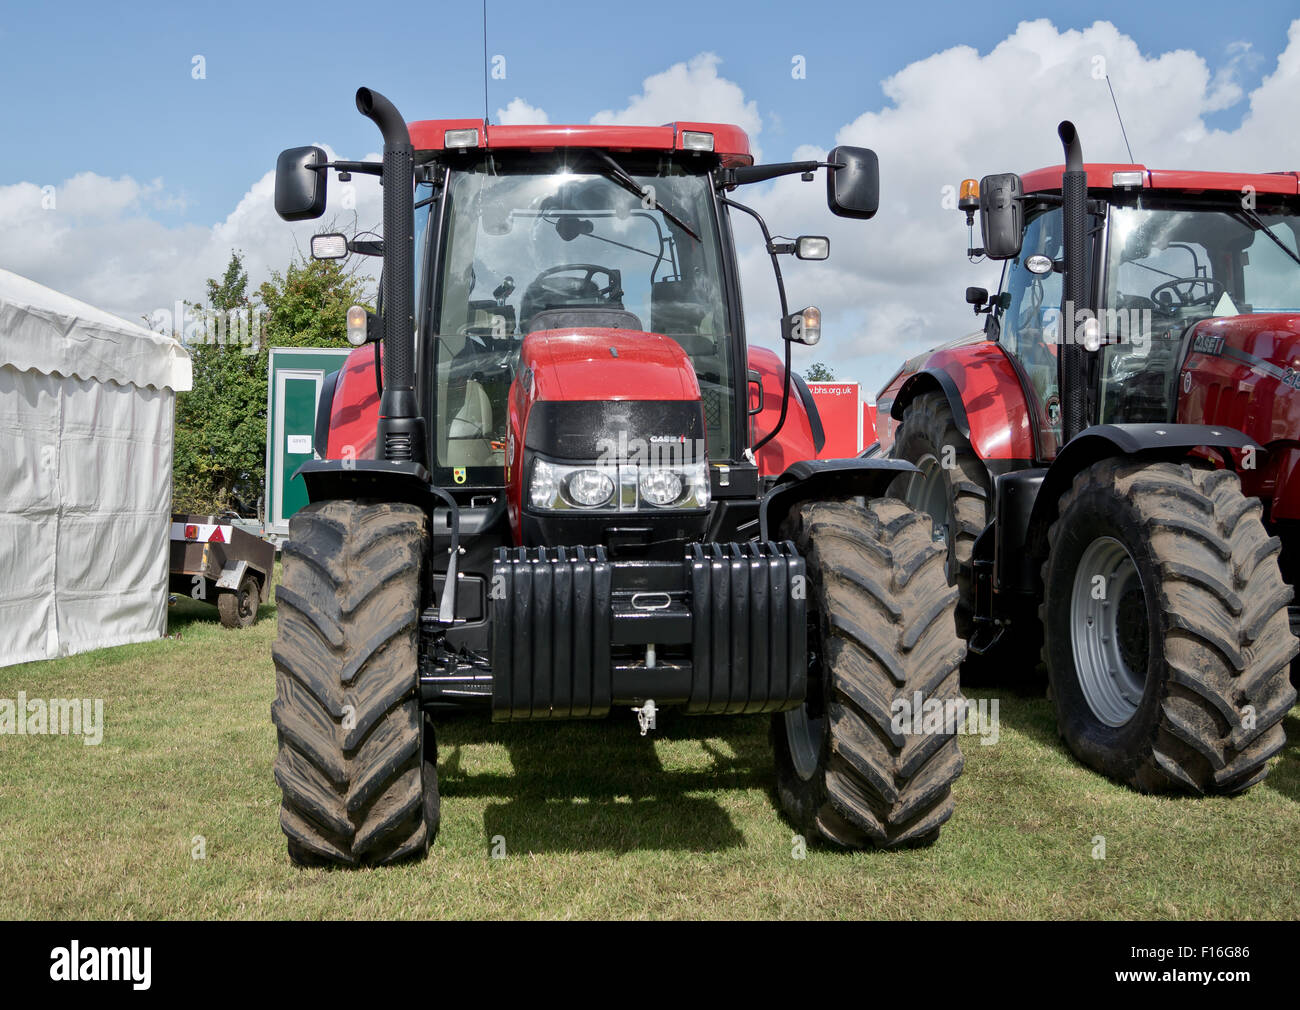 The Bucks County Show,UK  27/08/15. A case ii Tractor on display. Credit:  Scott Carruthers/Alamy Live News Stock Photo